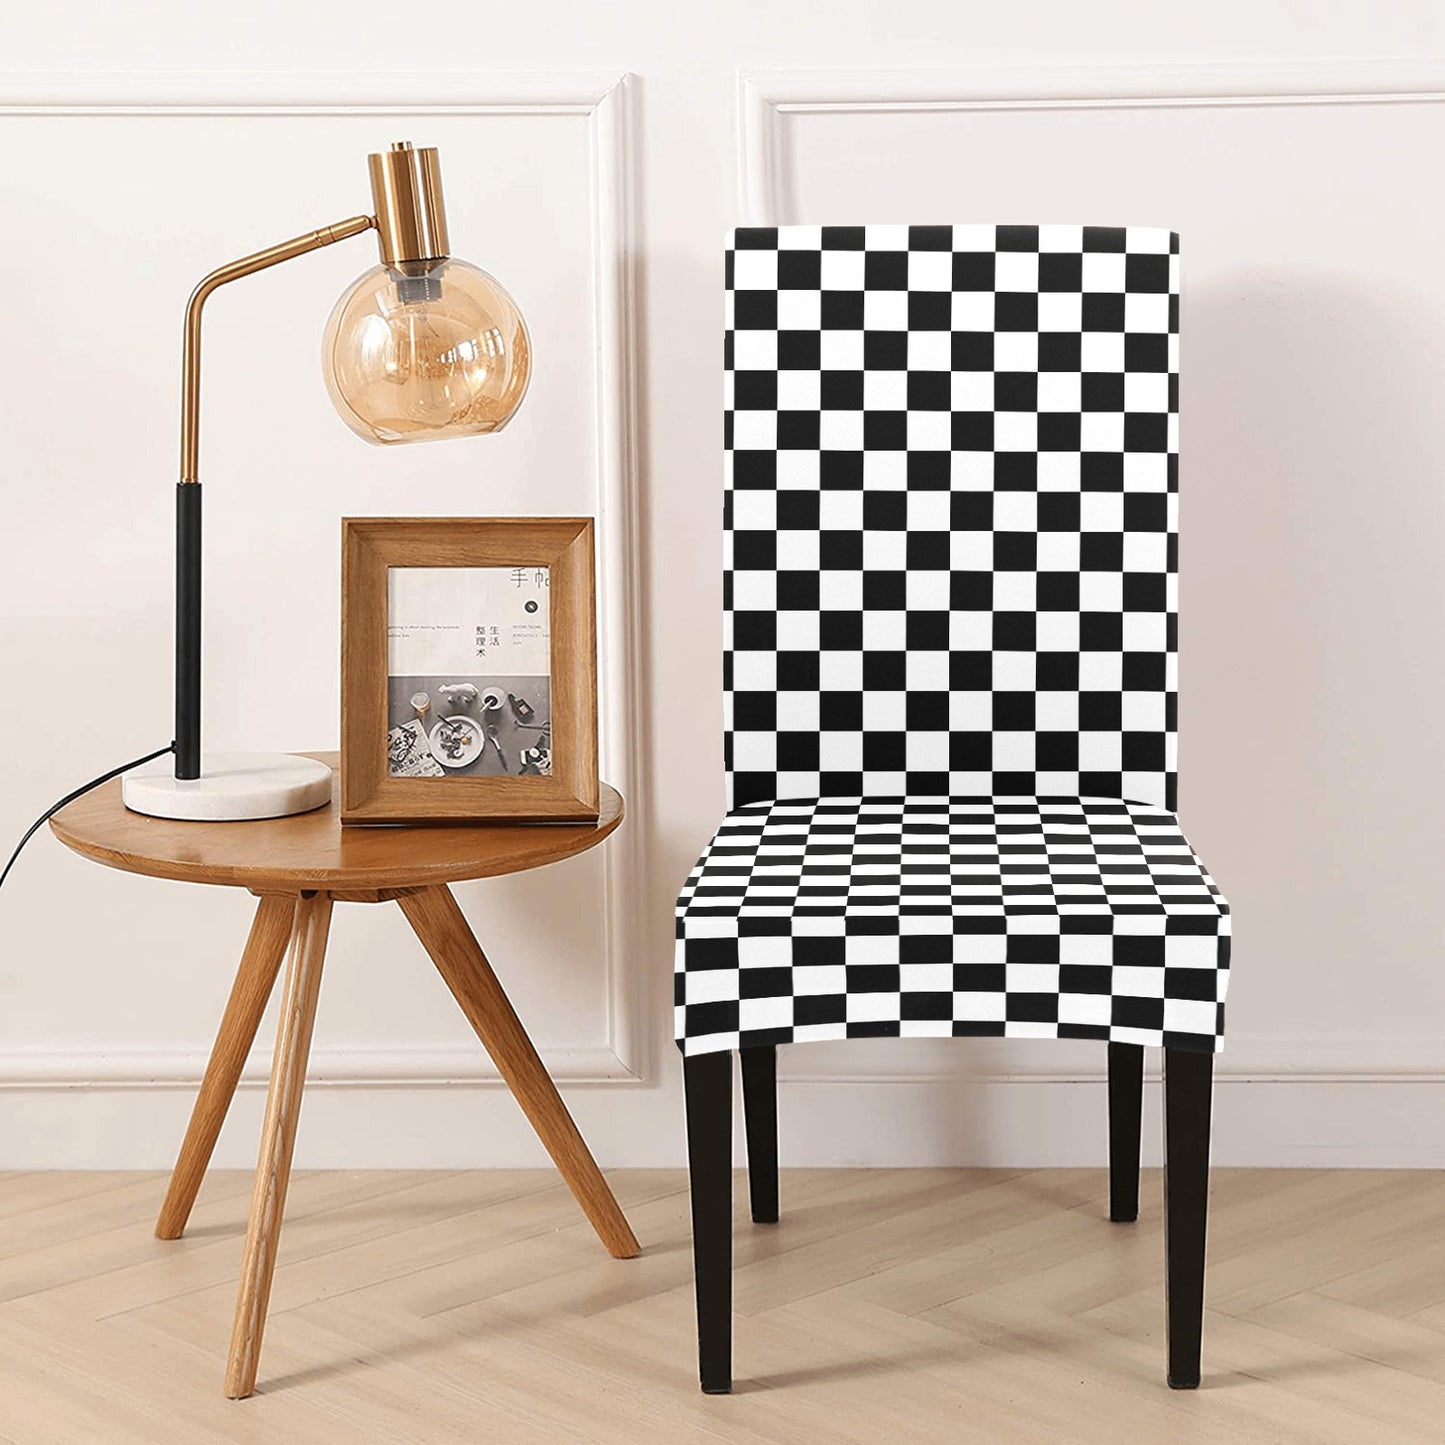 Checkered Dining Chair Seat Covers, Black White Check Checkerboard Stretch Slipcover Furniture Dining Room Home Decor Starcove Fashion